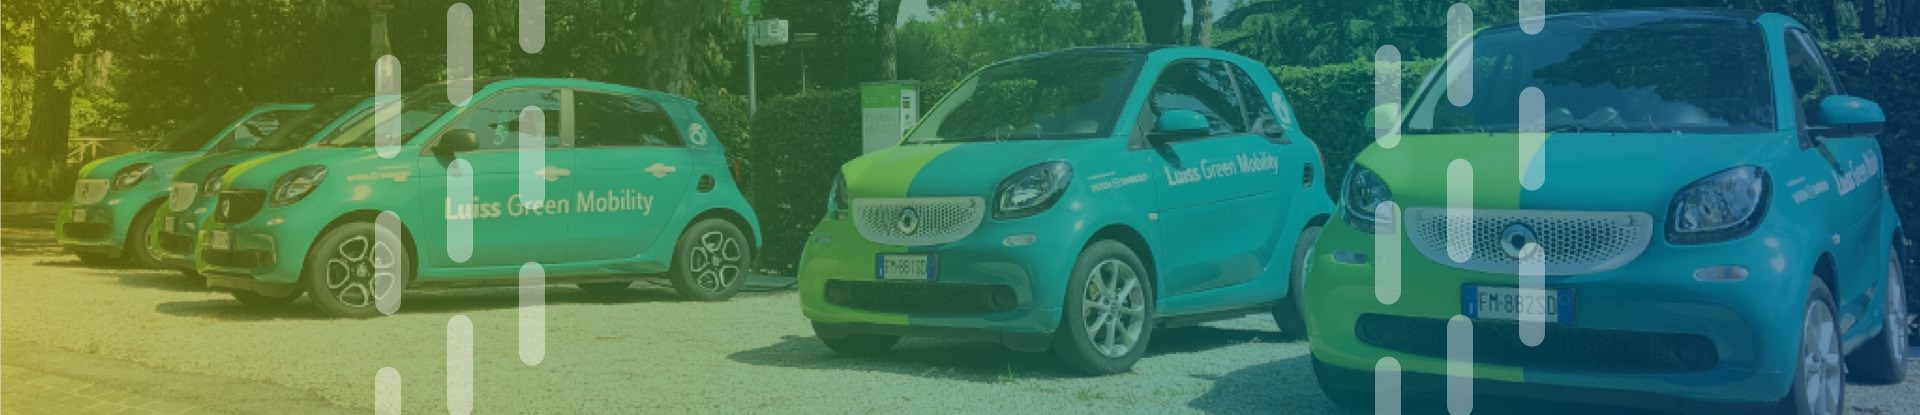 electric cars Luiss project for sustainable mobility